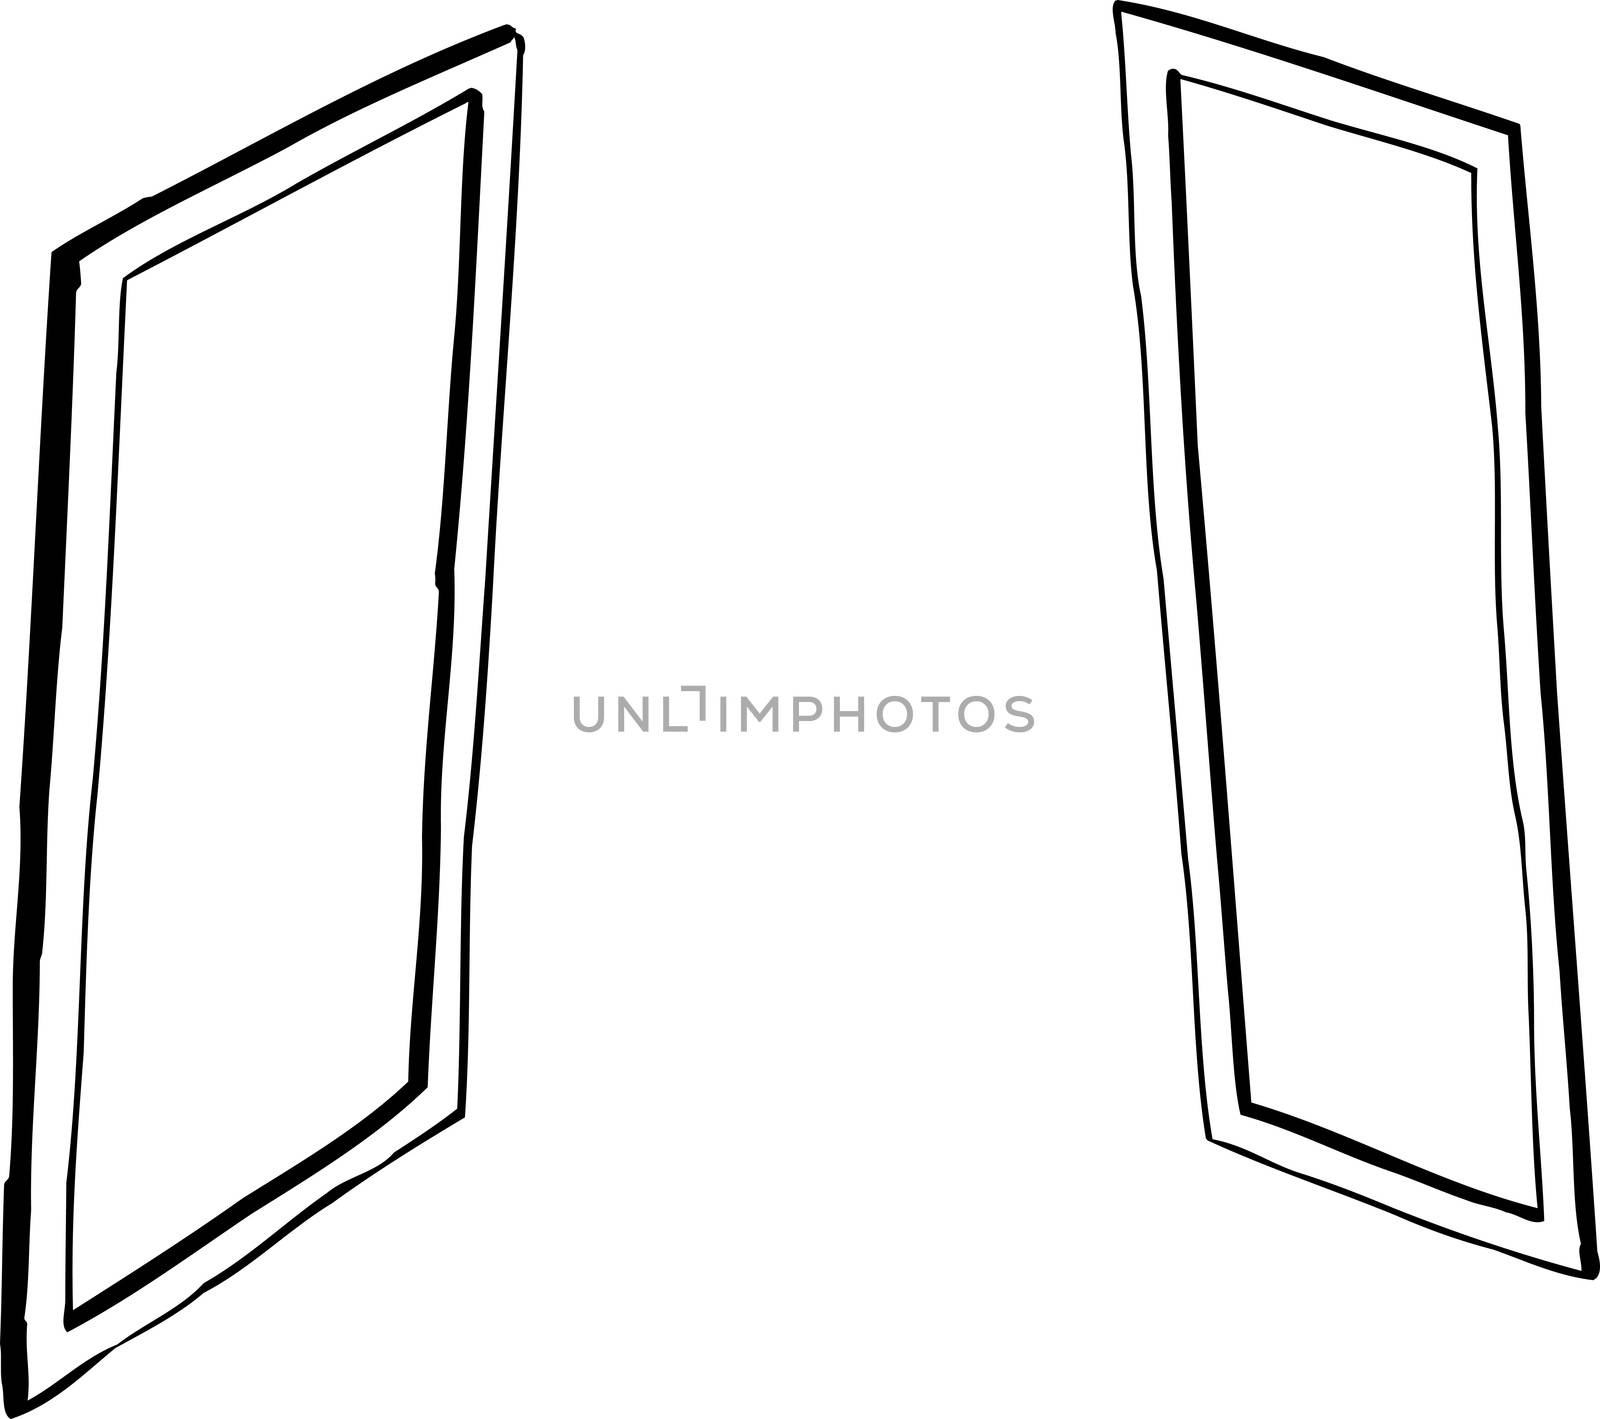 Outline cartoon of facing windows or mirrors over white background